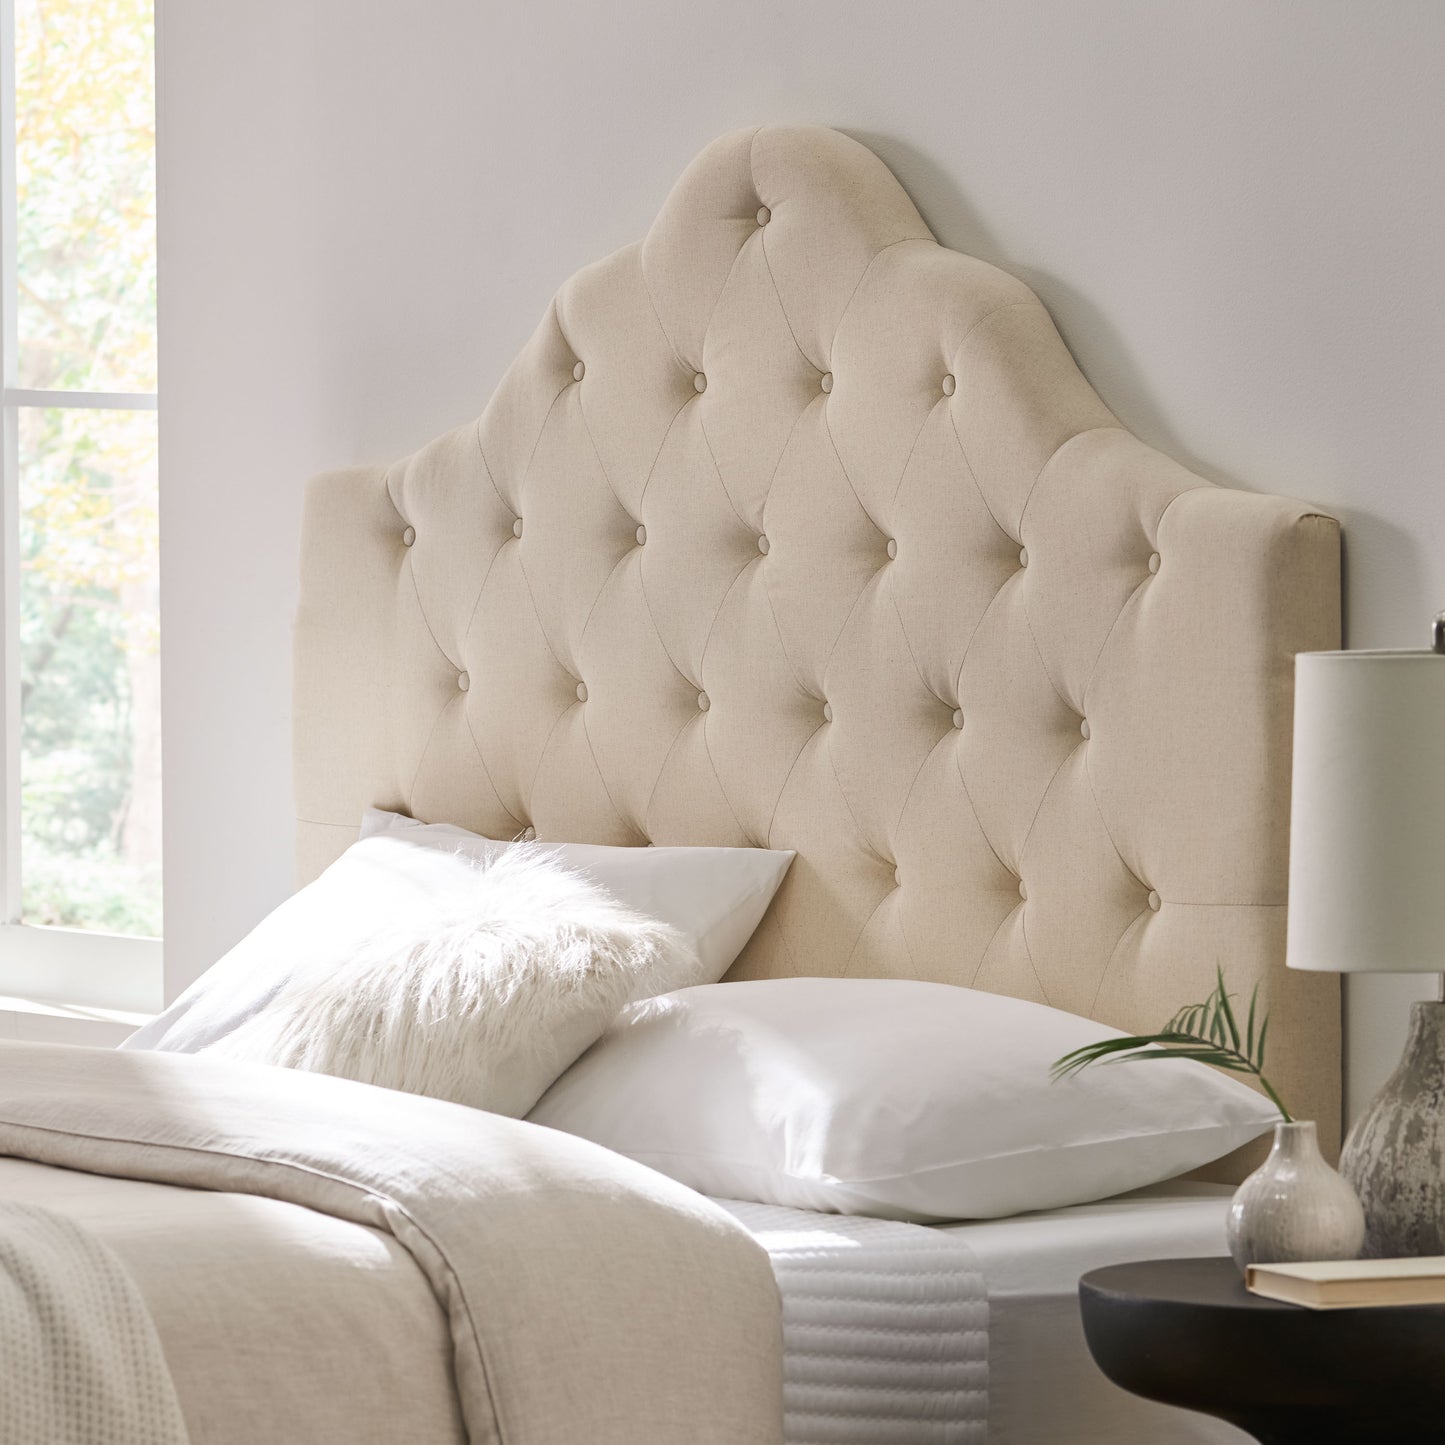 Orlban Contemporary Button Tufted Beige Fabric Queen/Full Headboard